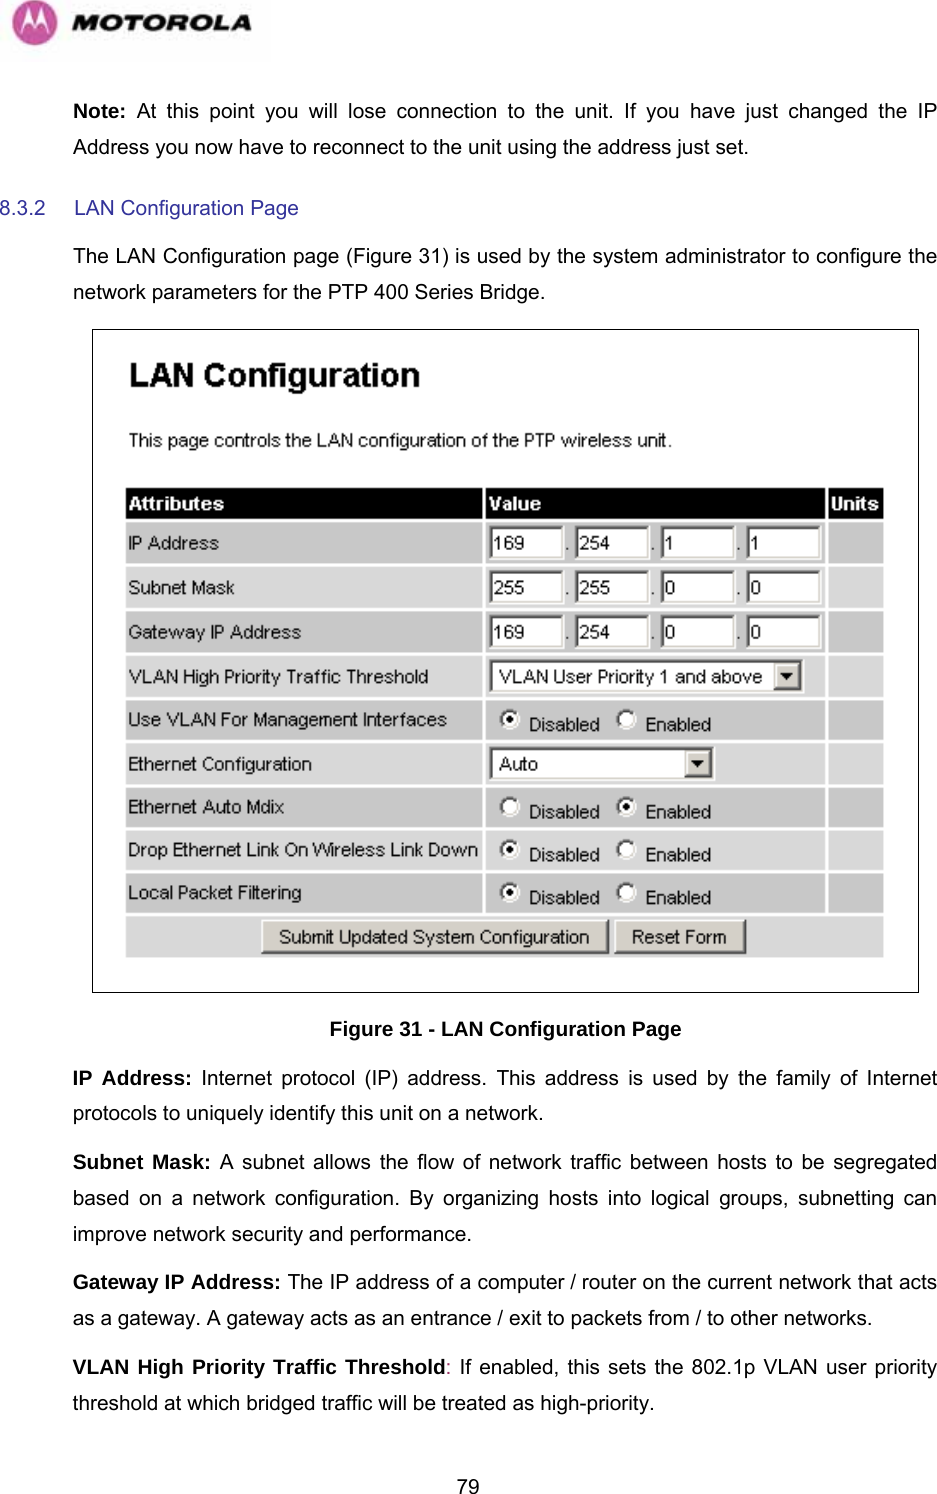   79Note: At this point you will lose connection to the unit. If you have just changed the IP Address you now have to reconnect to the unit using the address just set. 8.3.2  LAN Configuration Page The LAN Configuration page (Figure 31) is used by the system administrator to configure the network parameters for the PTP 400 Series Bridge.  Figure 31 - LAN Configuration Page IP Address: Internet protocol (IP) address. This address is used by the family of Internet protocols to uniquely identify this unit on a network.  Subnet Mask: A subnet allows the flow of network traffic between hosts to be segregated based on a network configuration. By organizing hosts into logical groups, subnetting can improve network security and performance.  Gateway IP Address: The IP address of a computer / router on the current network that acts as a gateway. A gateway acts as an entrance / exit to packets from / to other networks.  VLAN High Priority Traffic Threshold: If enabled, this sets the 802.1p VLAN user priority threshold at which bridged traffic will be treated as high-priority. 